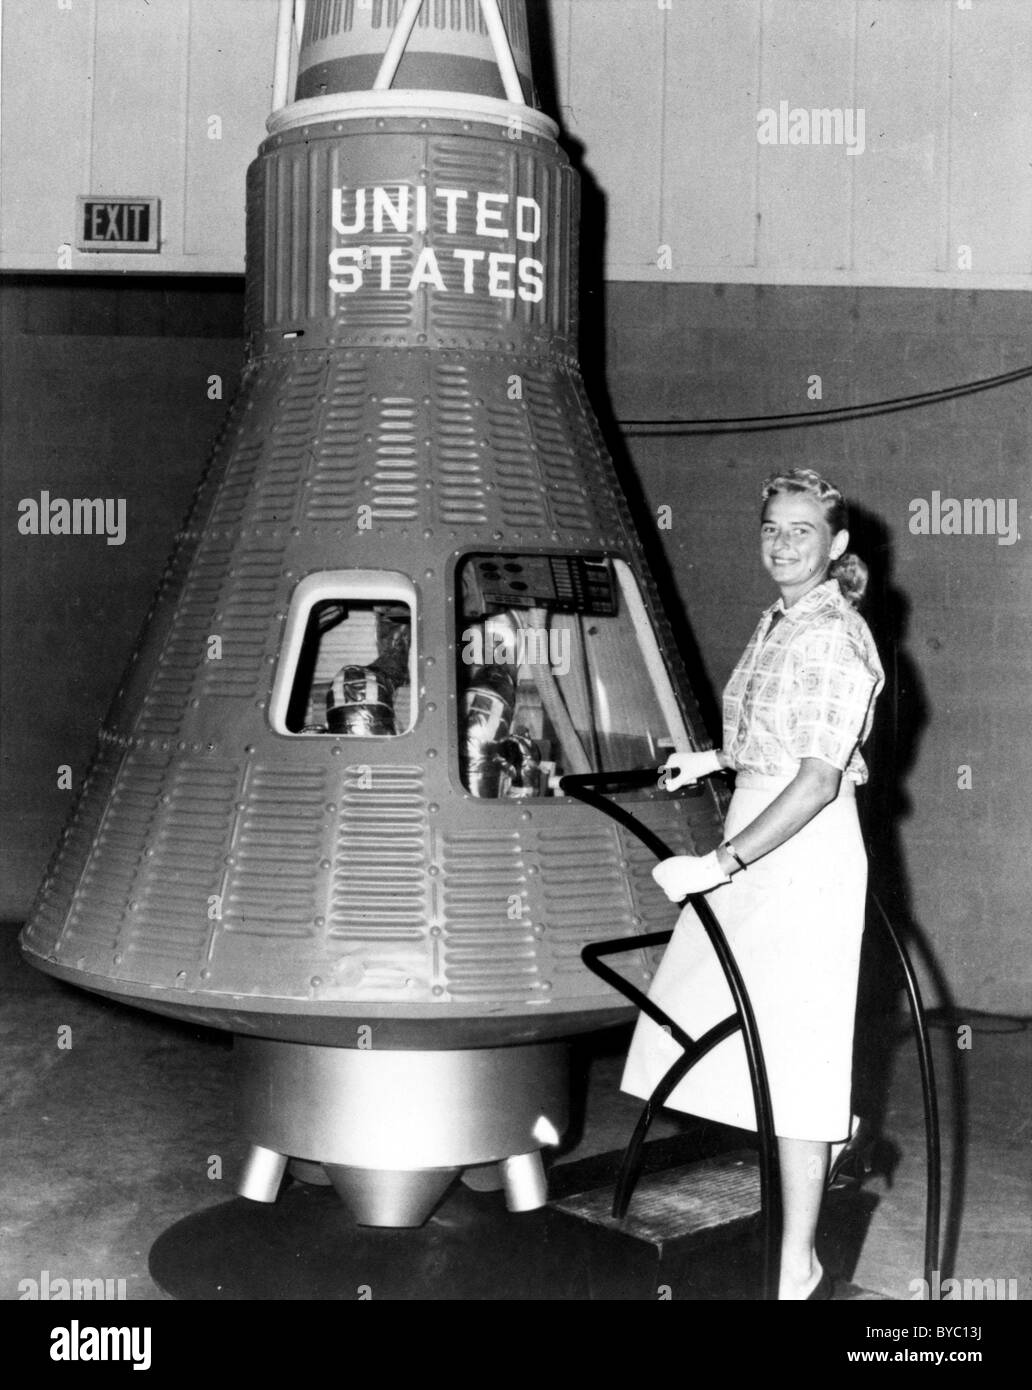 Jerrie Cobb, a First Lady Astronaut Trainee, poses next to a Mercury spaceship capsule. Stock Photo